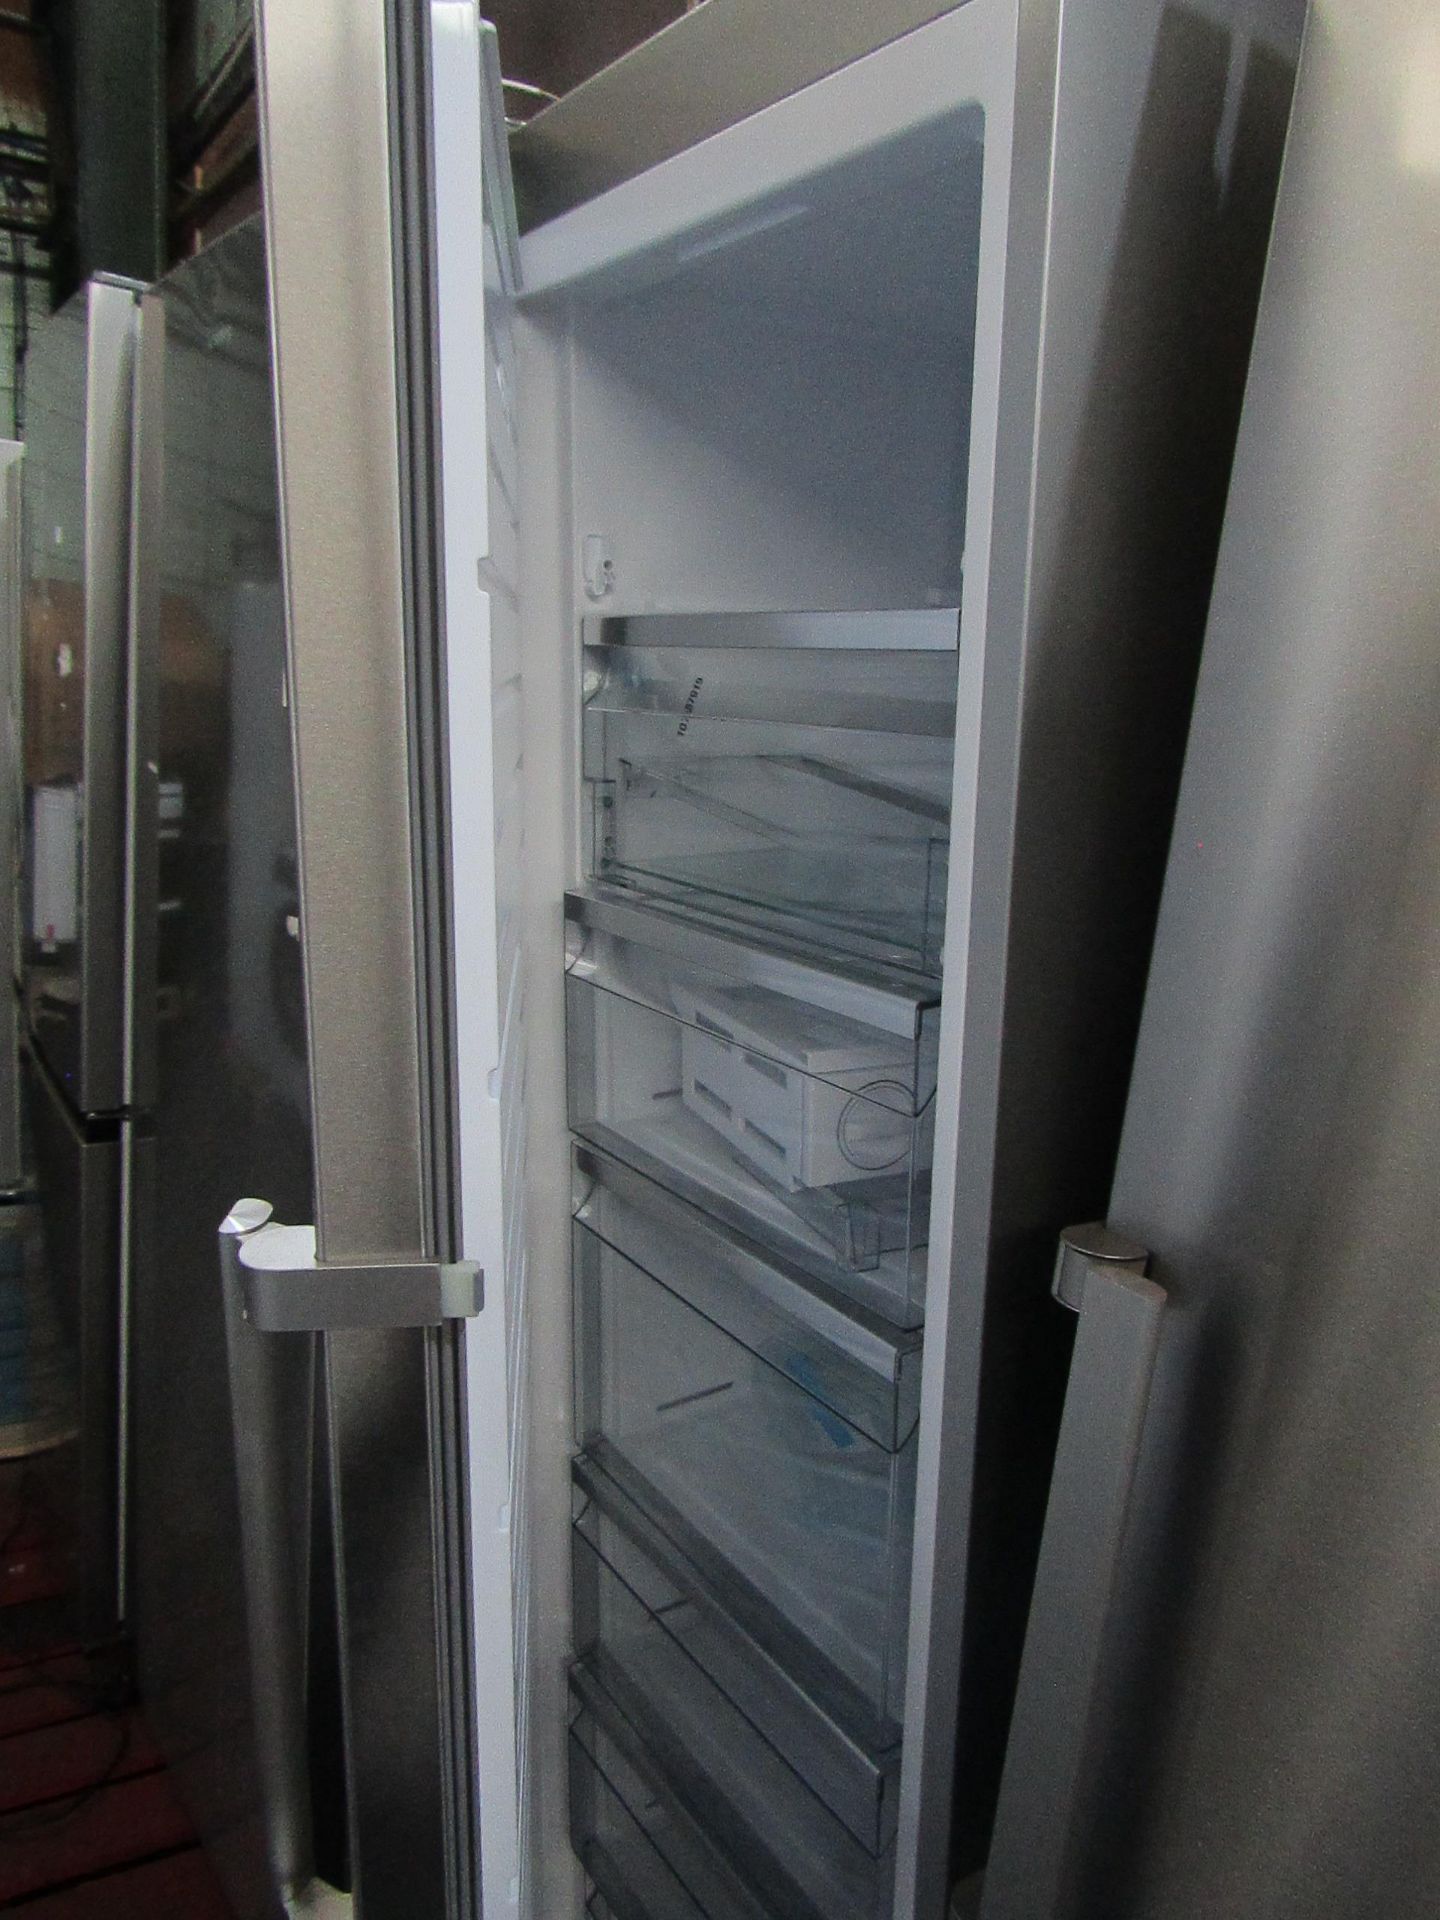 Sharp - Tall Stainless Steel Freestanding Freezer - Tested Working. - Image 2 of 2